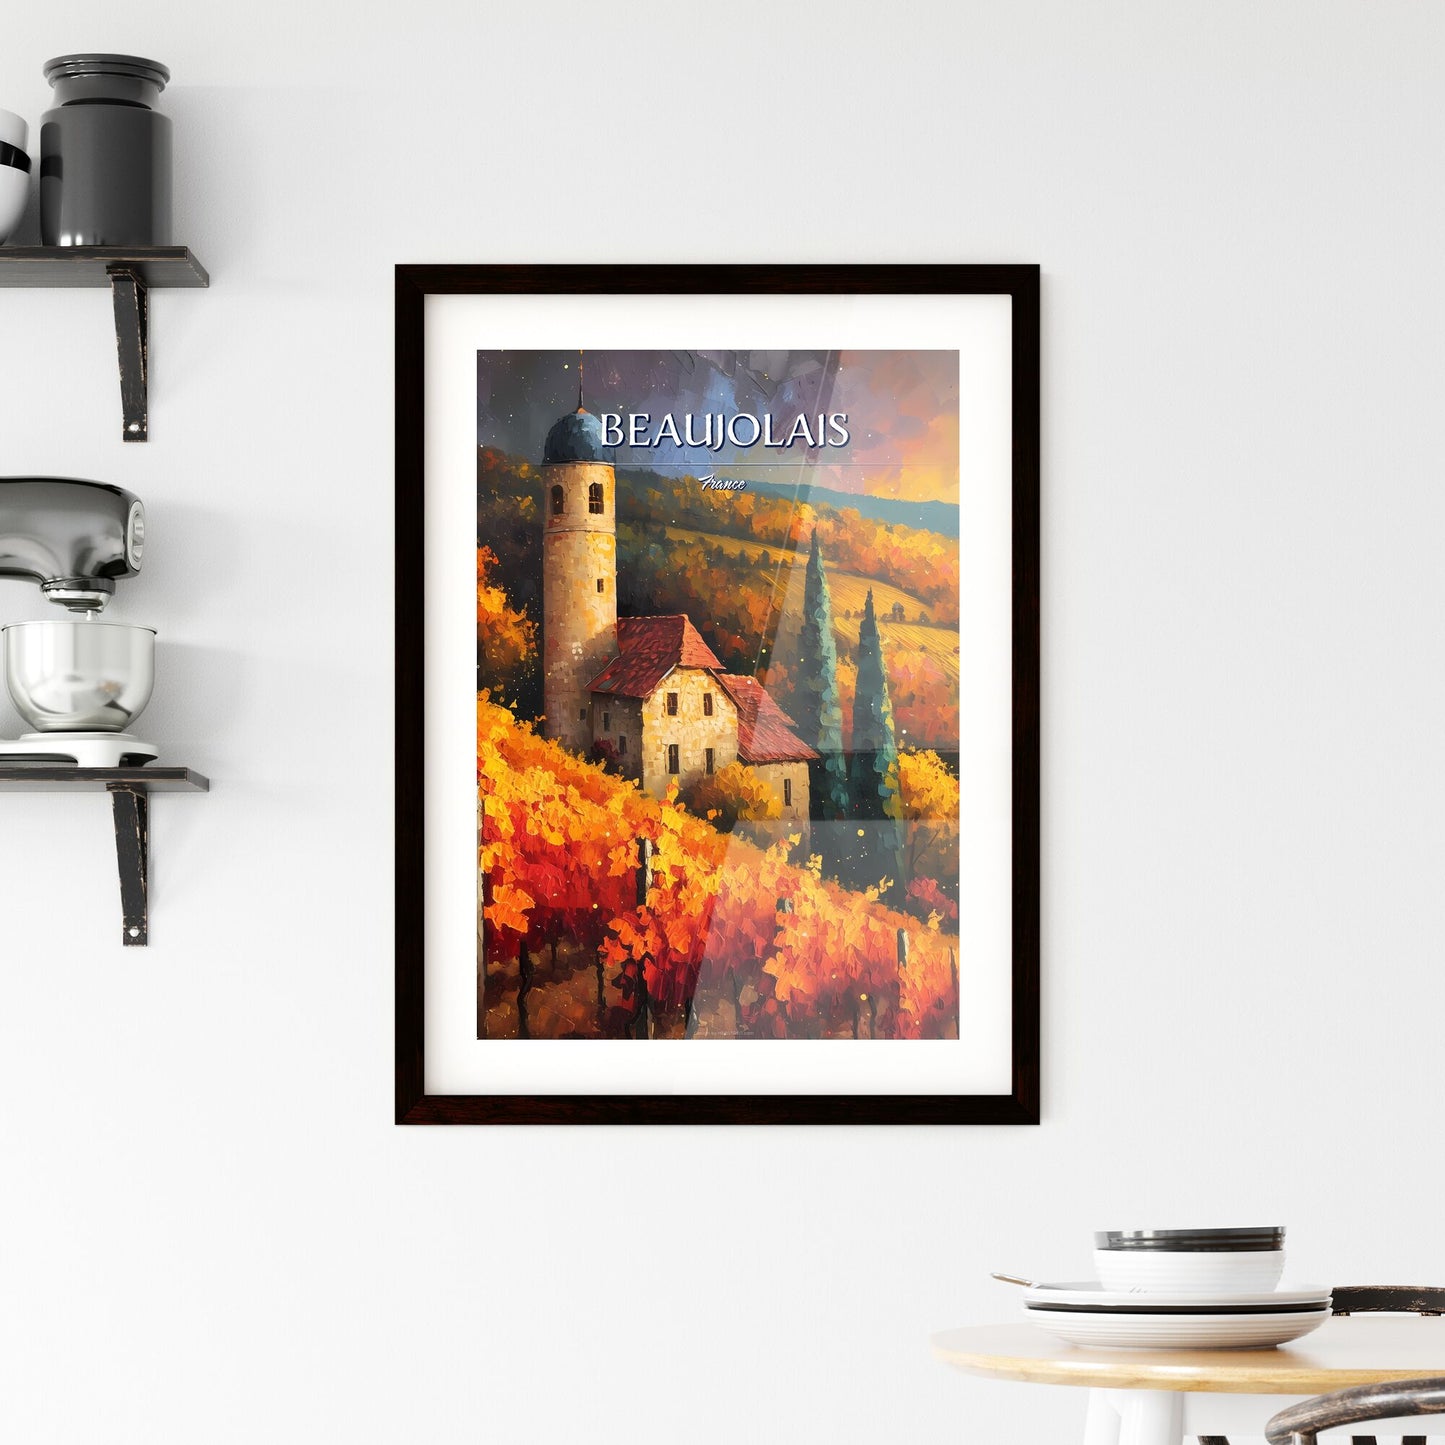 Beaujolais, France - Art print of a painting of a house in a vineyard Default Title